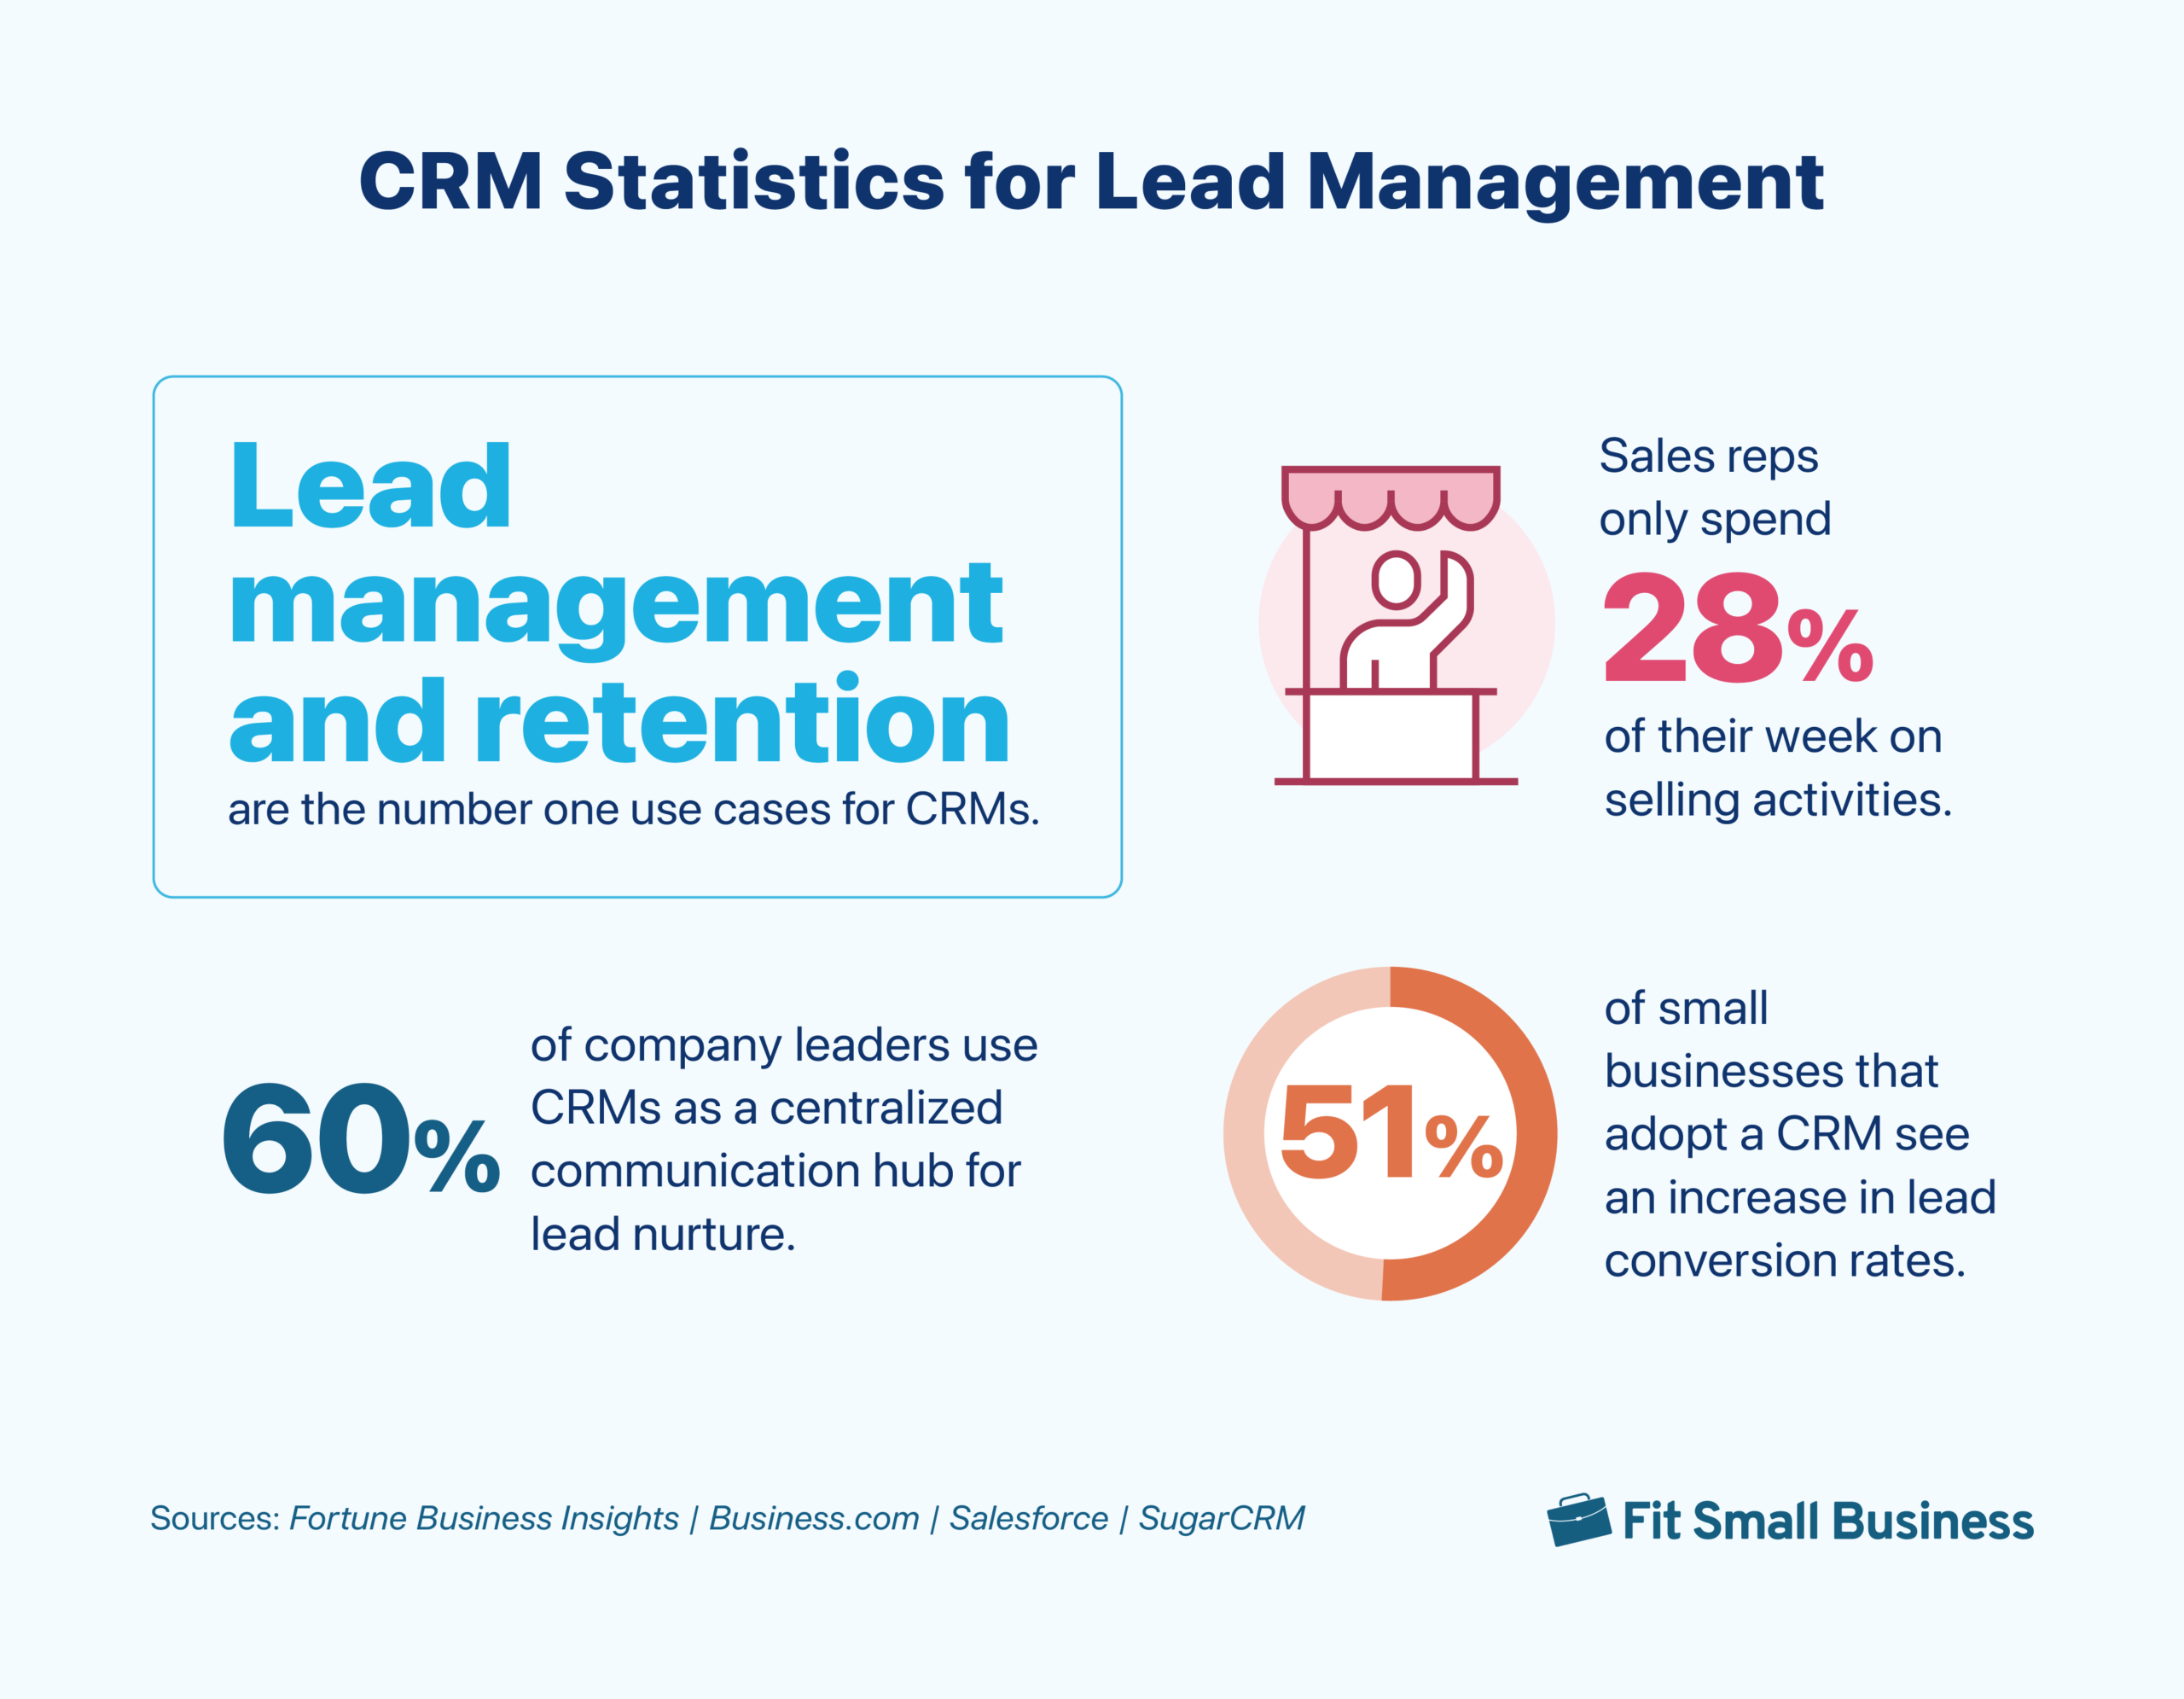 An infographic containing several CRM statistics for lead management.